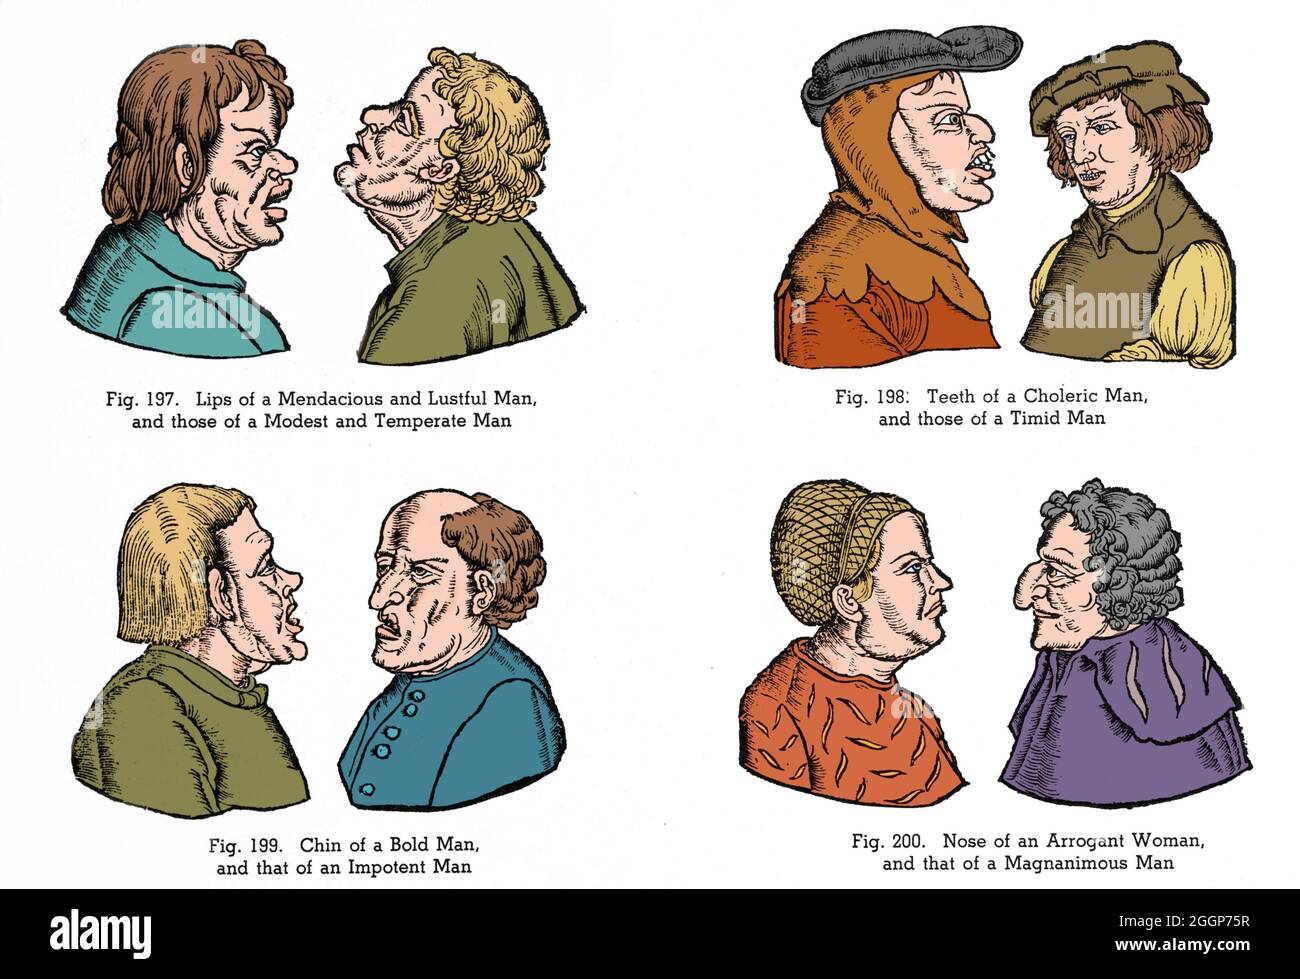 Illustrations of medieval stereotypes of personalities based on facial features. The pseudoscience of physiognomy is the assessment of a person's character or personality from his or her outer appearance, especially the face. Color enhanced. Stock Photo